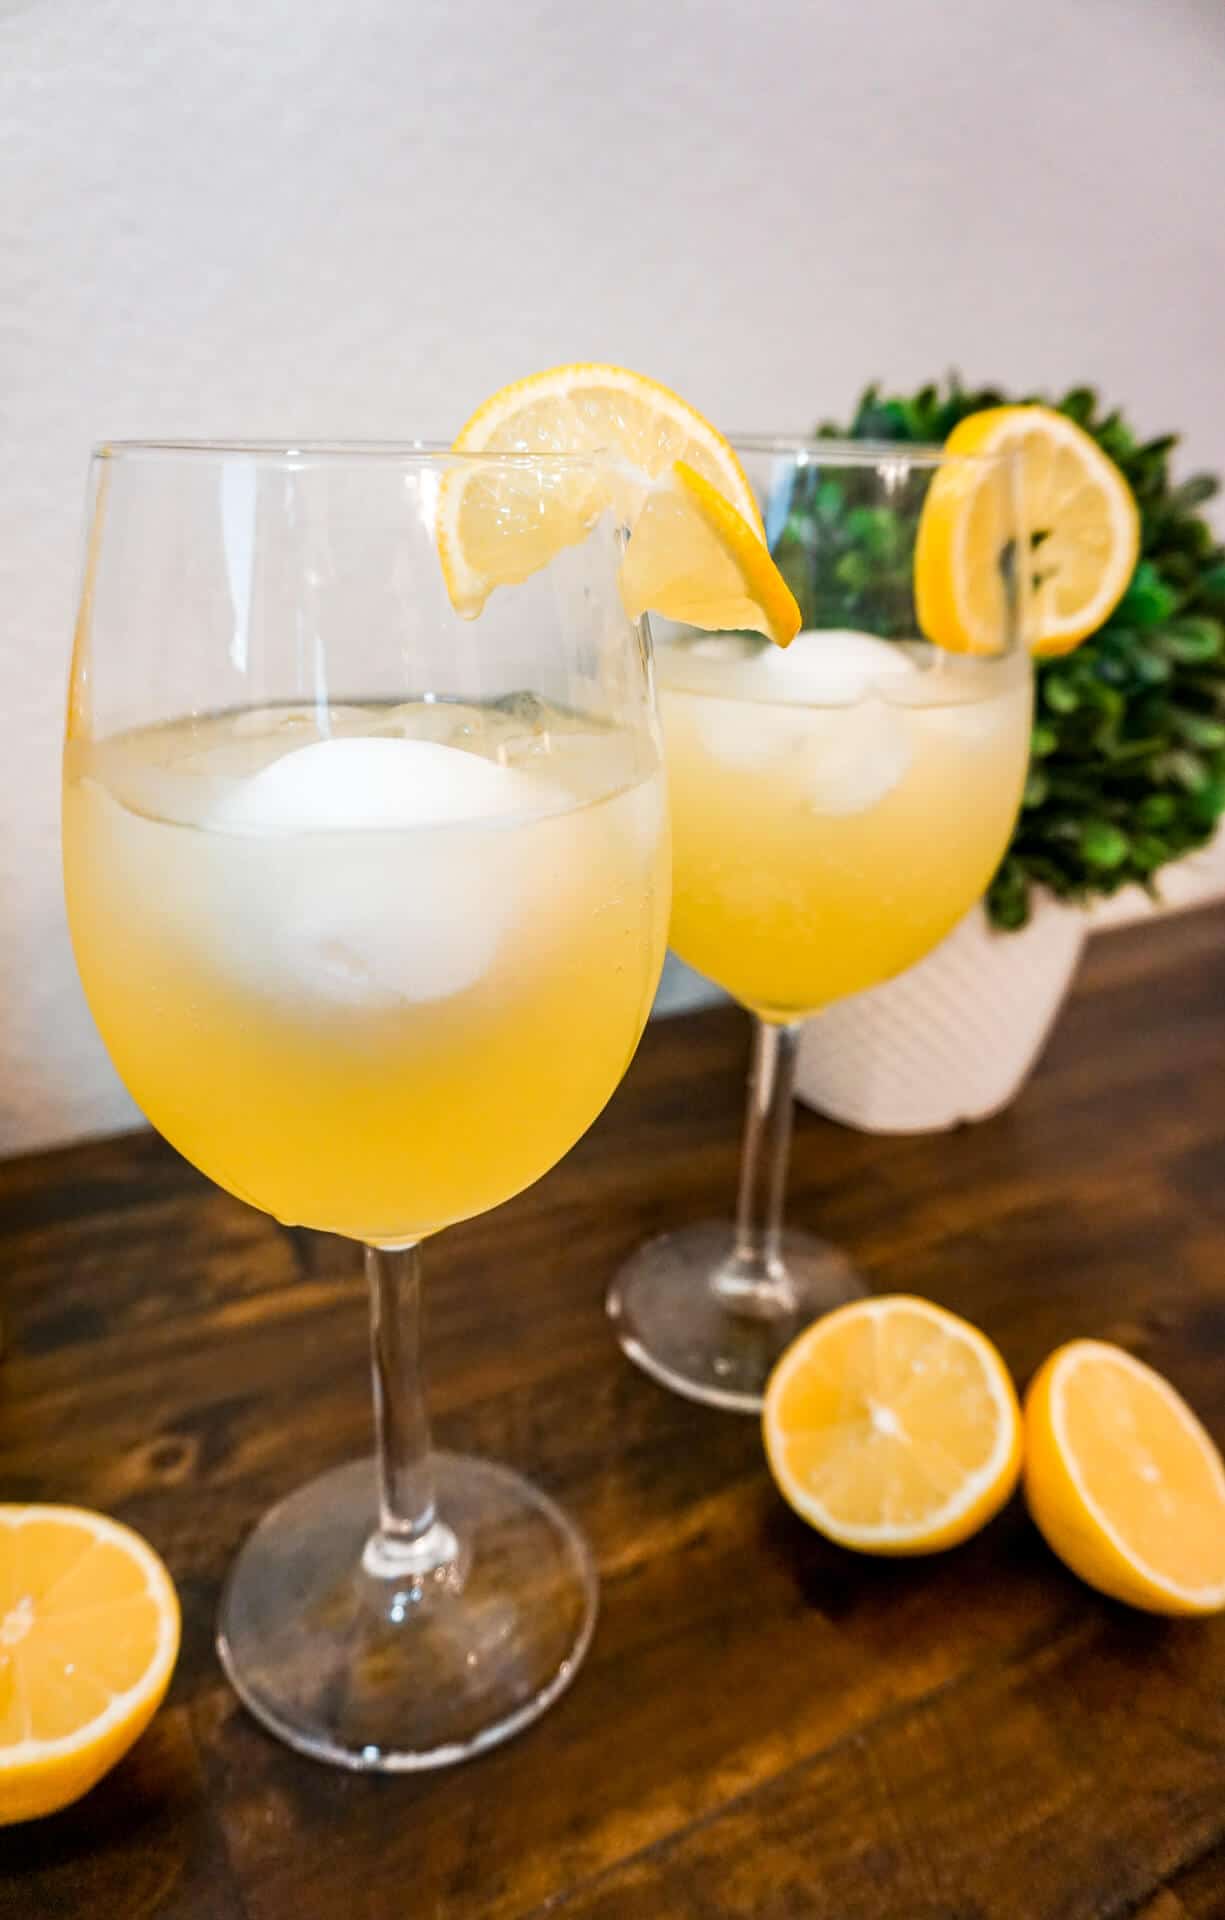 Limoncello Spritz - A Refreshing Cocktail from the Amalfi Coast